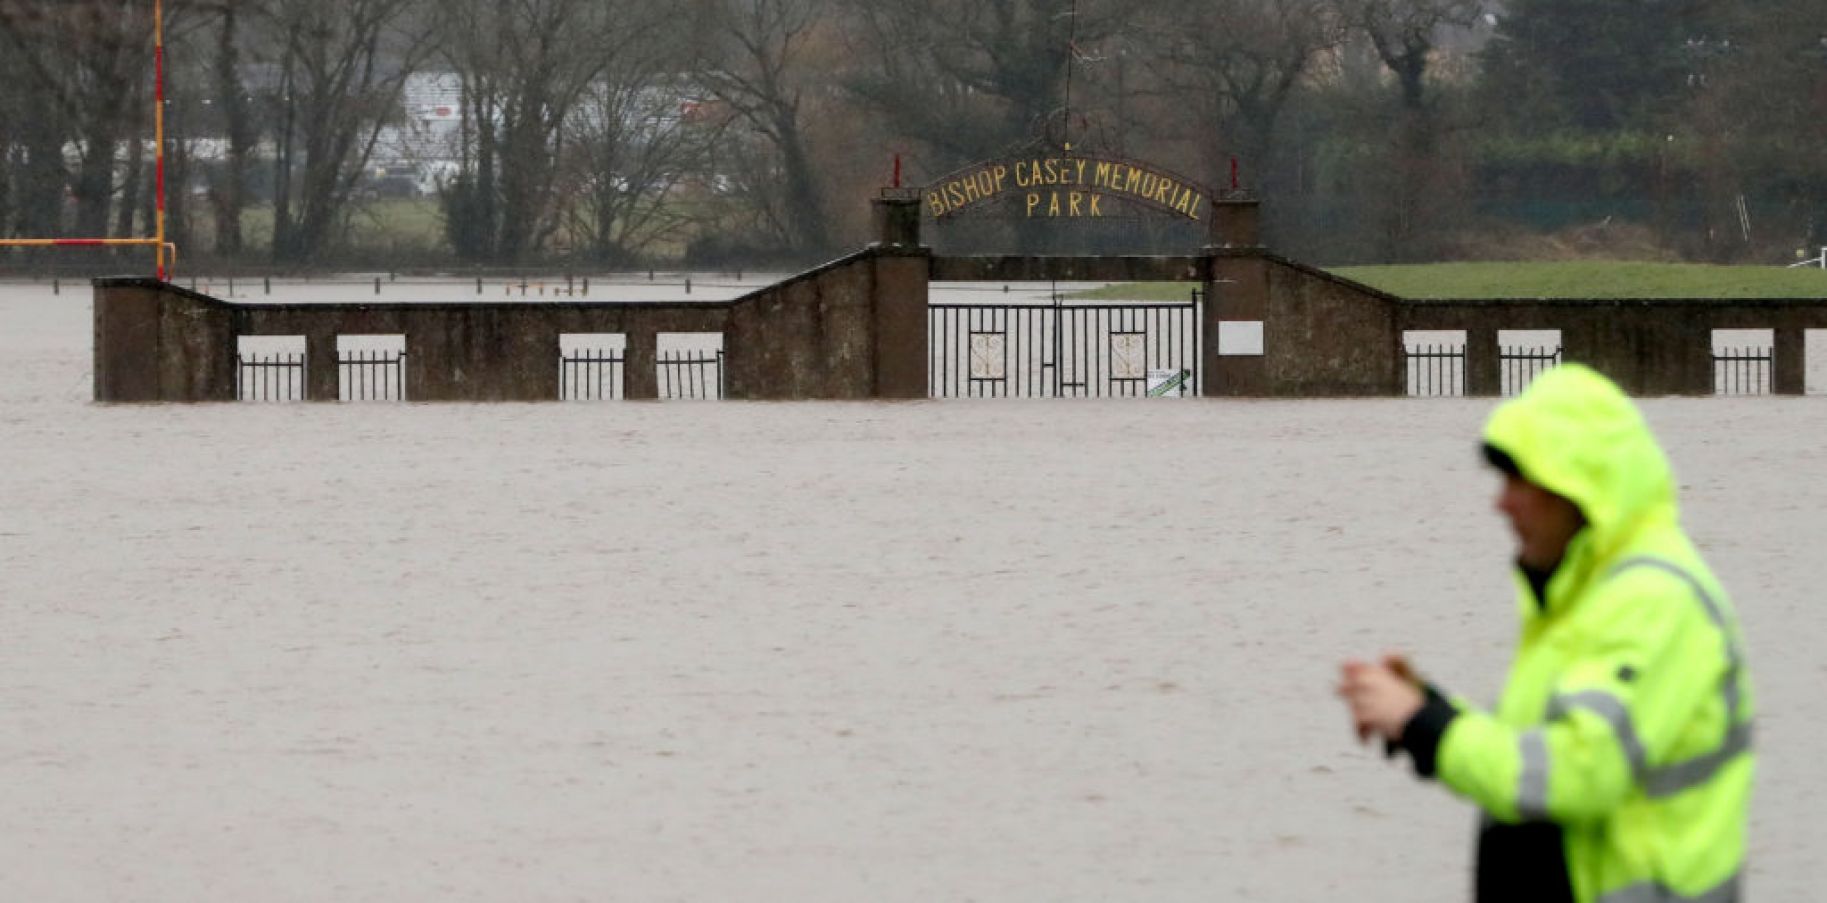 A Man Stops To Take A Picture Of Flood Water At The Bishop Casey Memorial Park In Mallow, Co Cork, After The River Blackwater Burst Its Banks. Photo: Pa